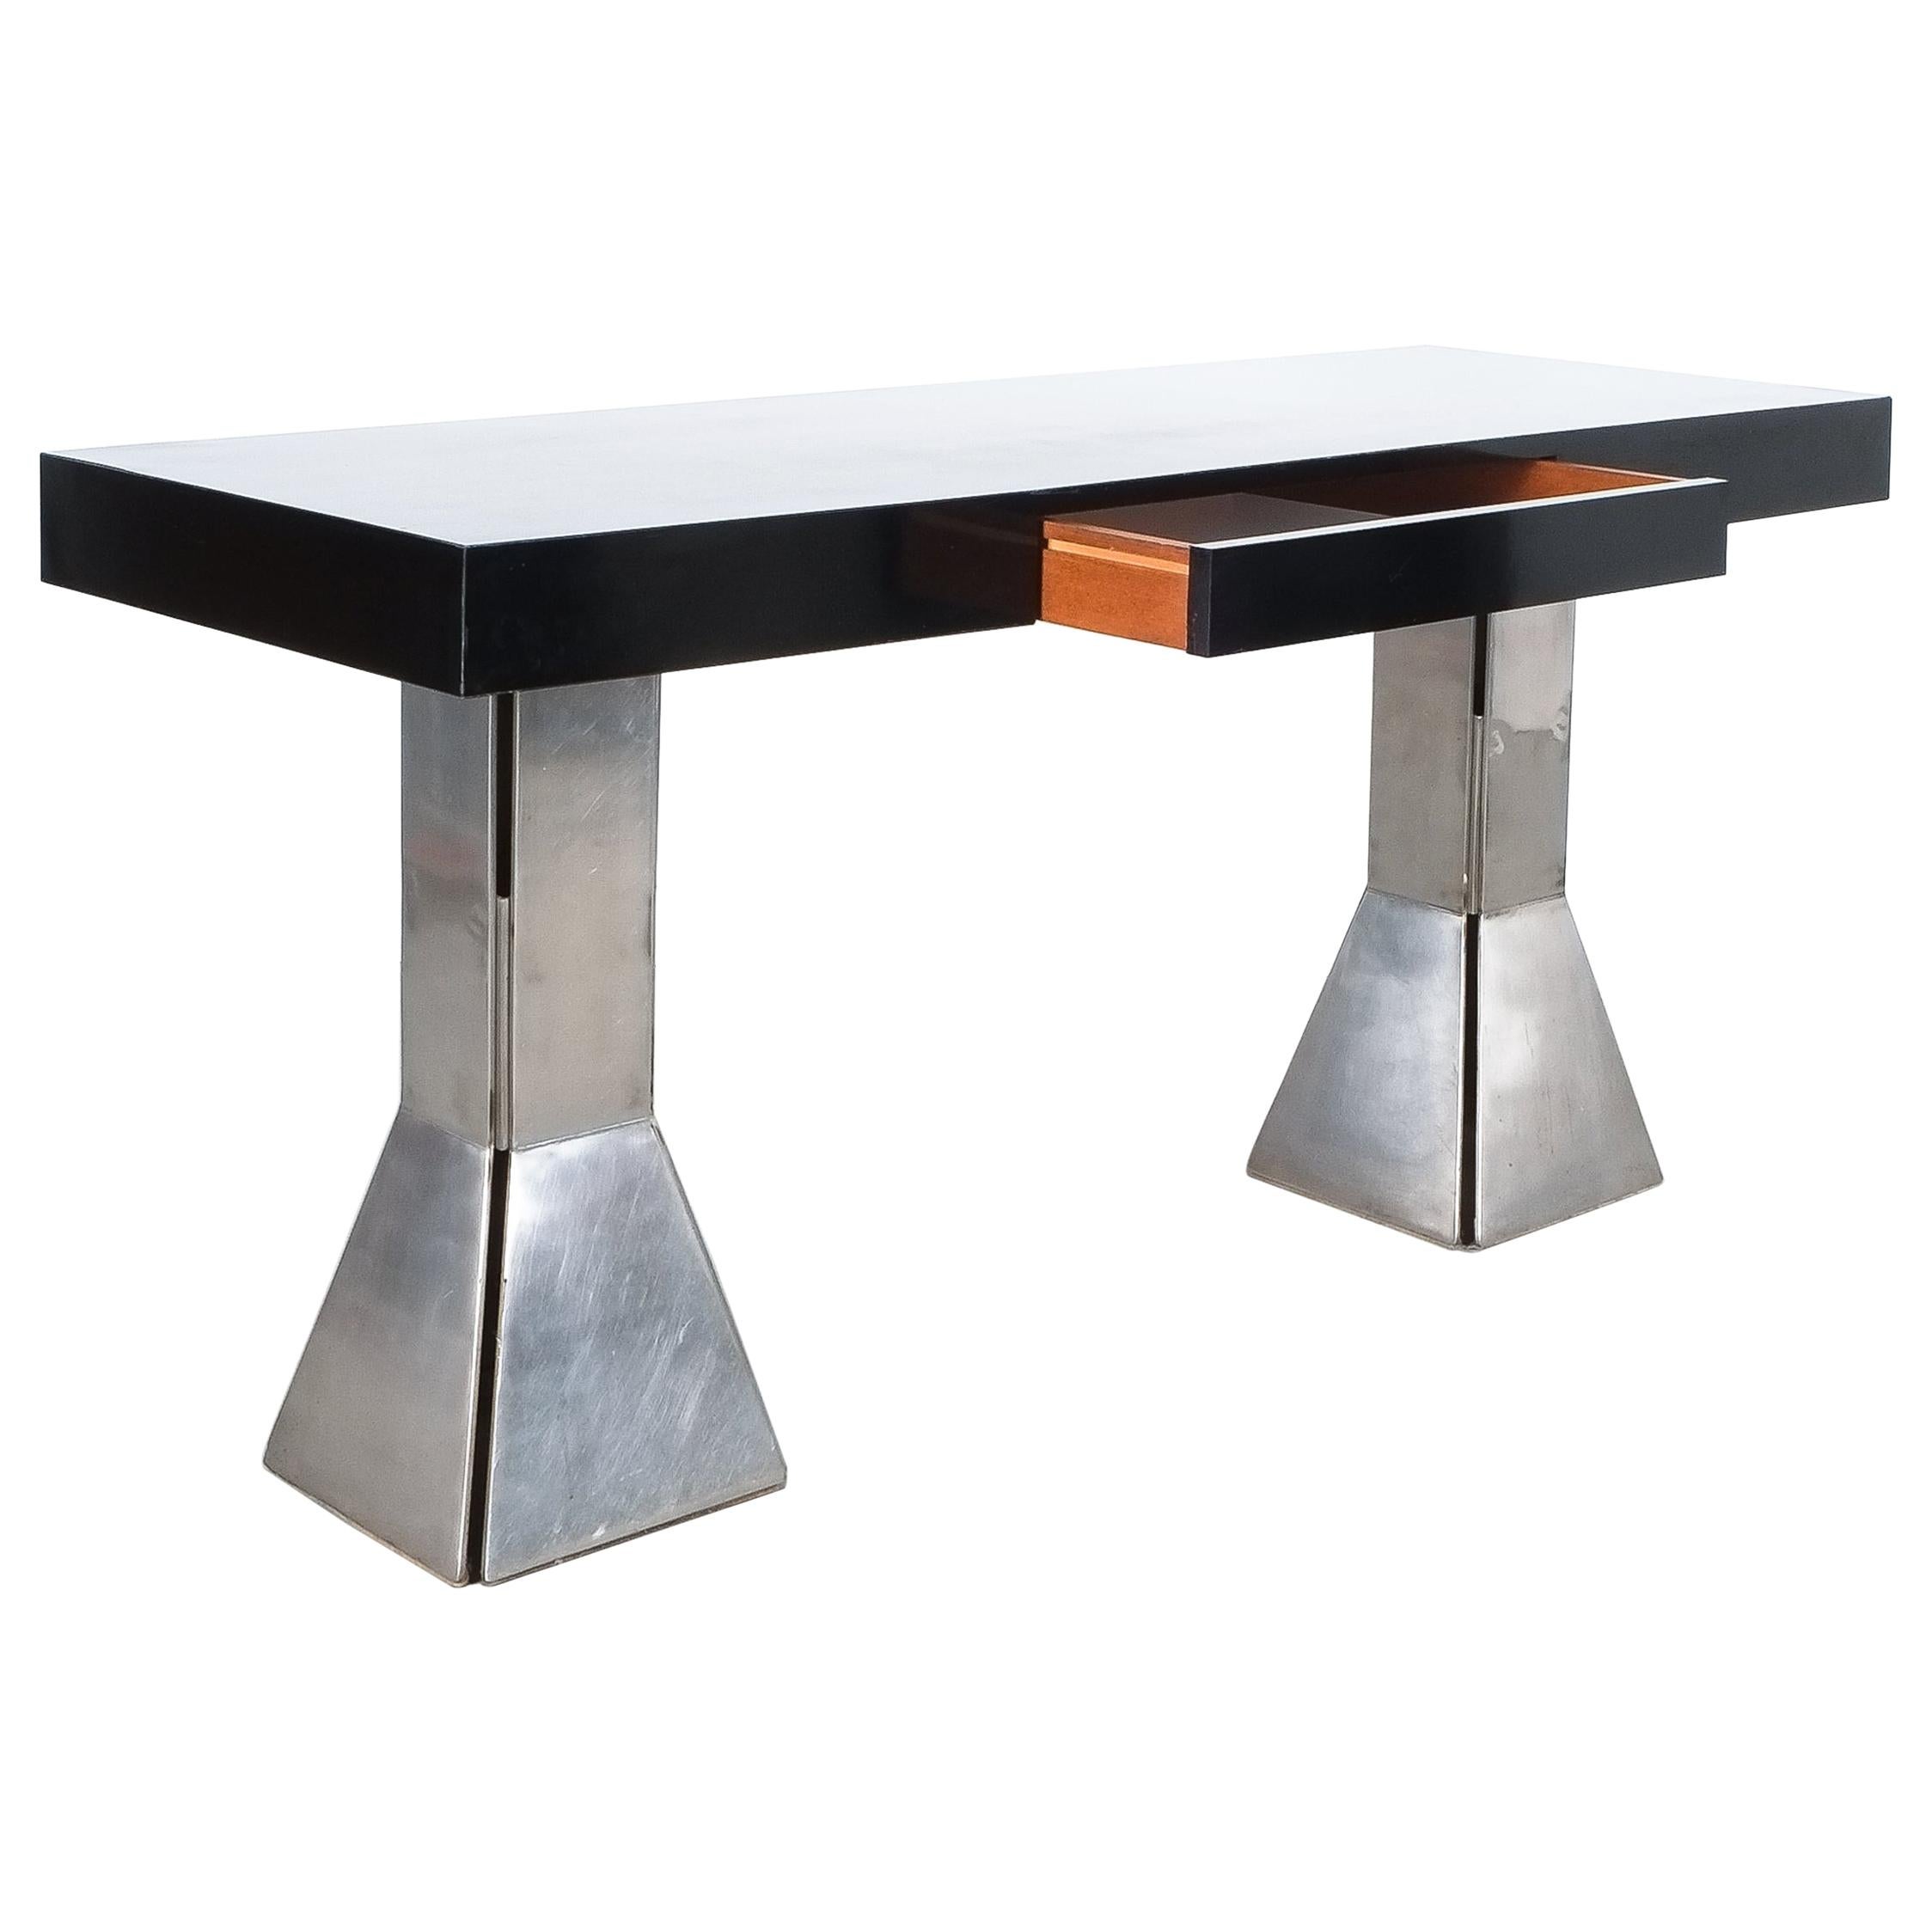 Console Table or Desk In Formica Stainless Steel, Italy